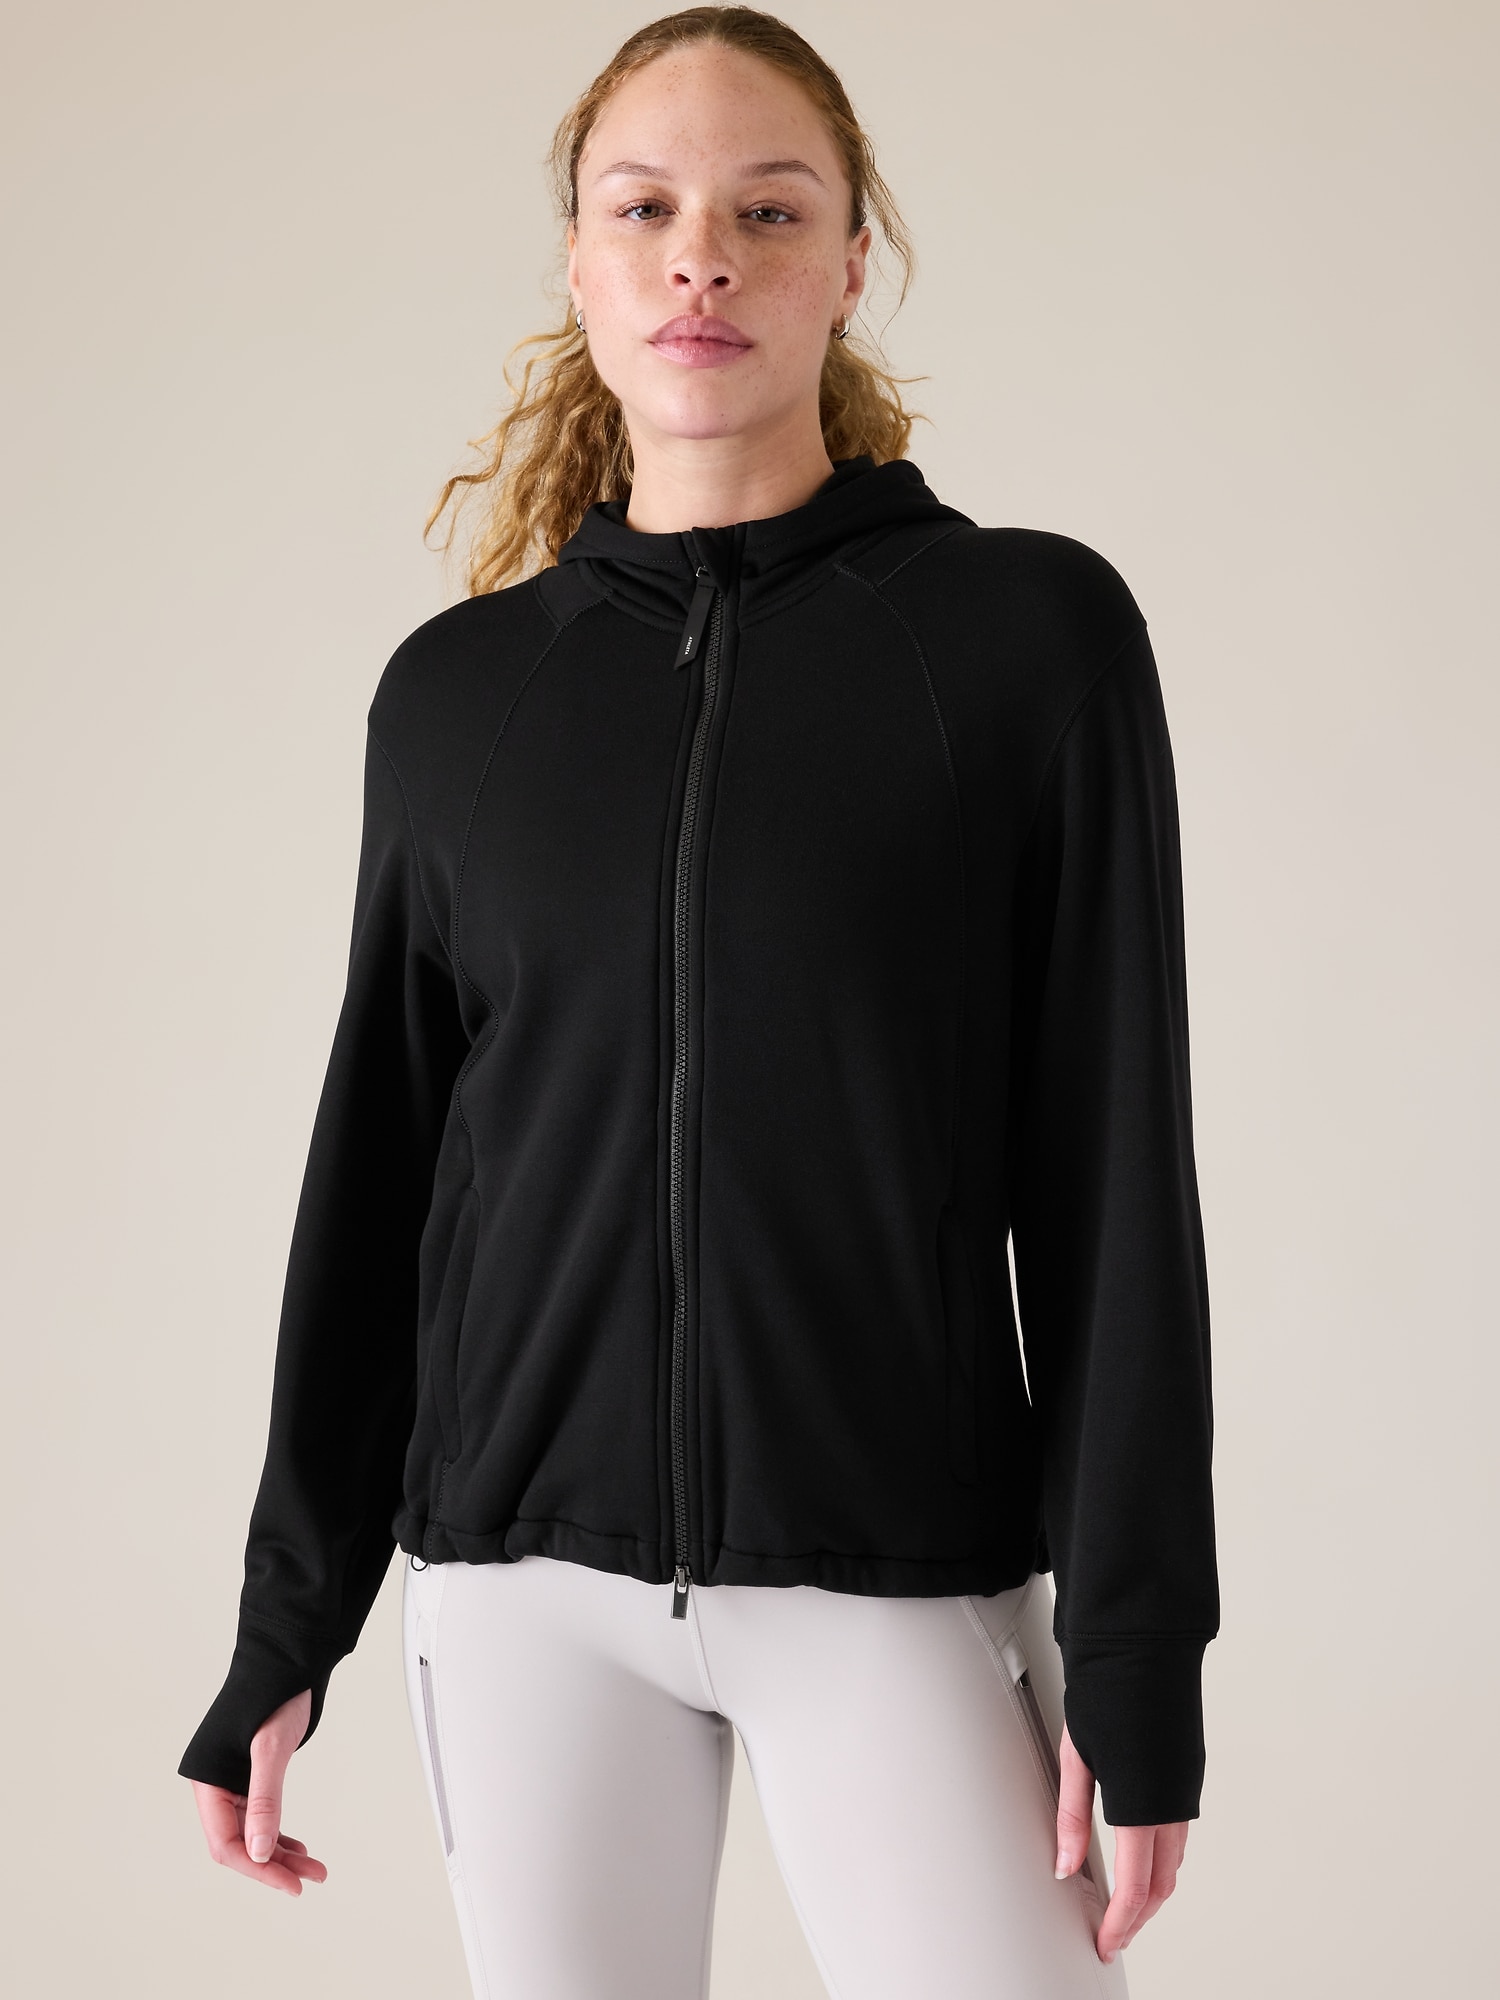 Hooded sweater with a big pleated neckline, thumb holes, black